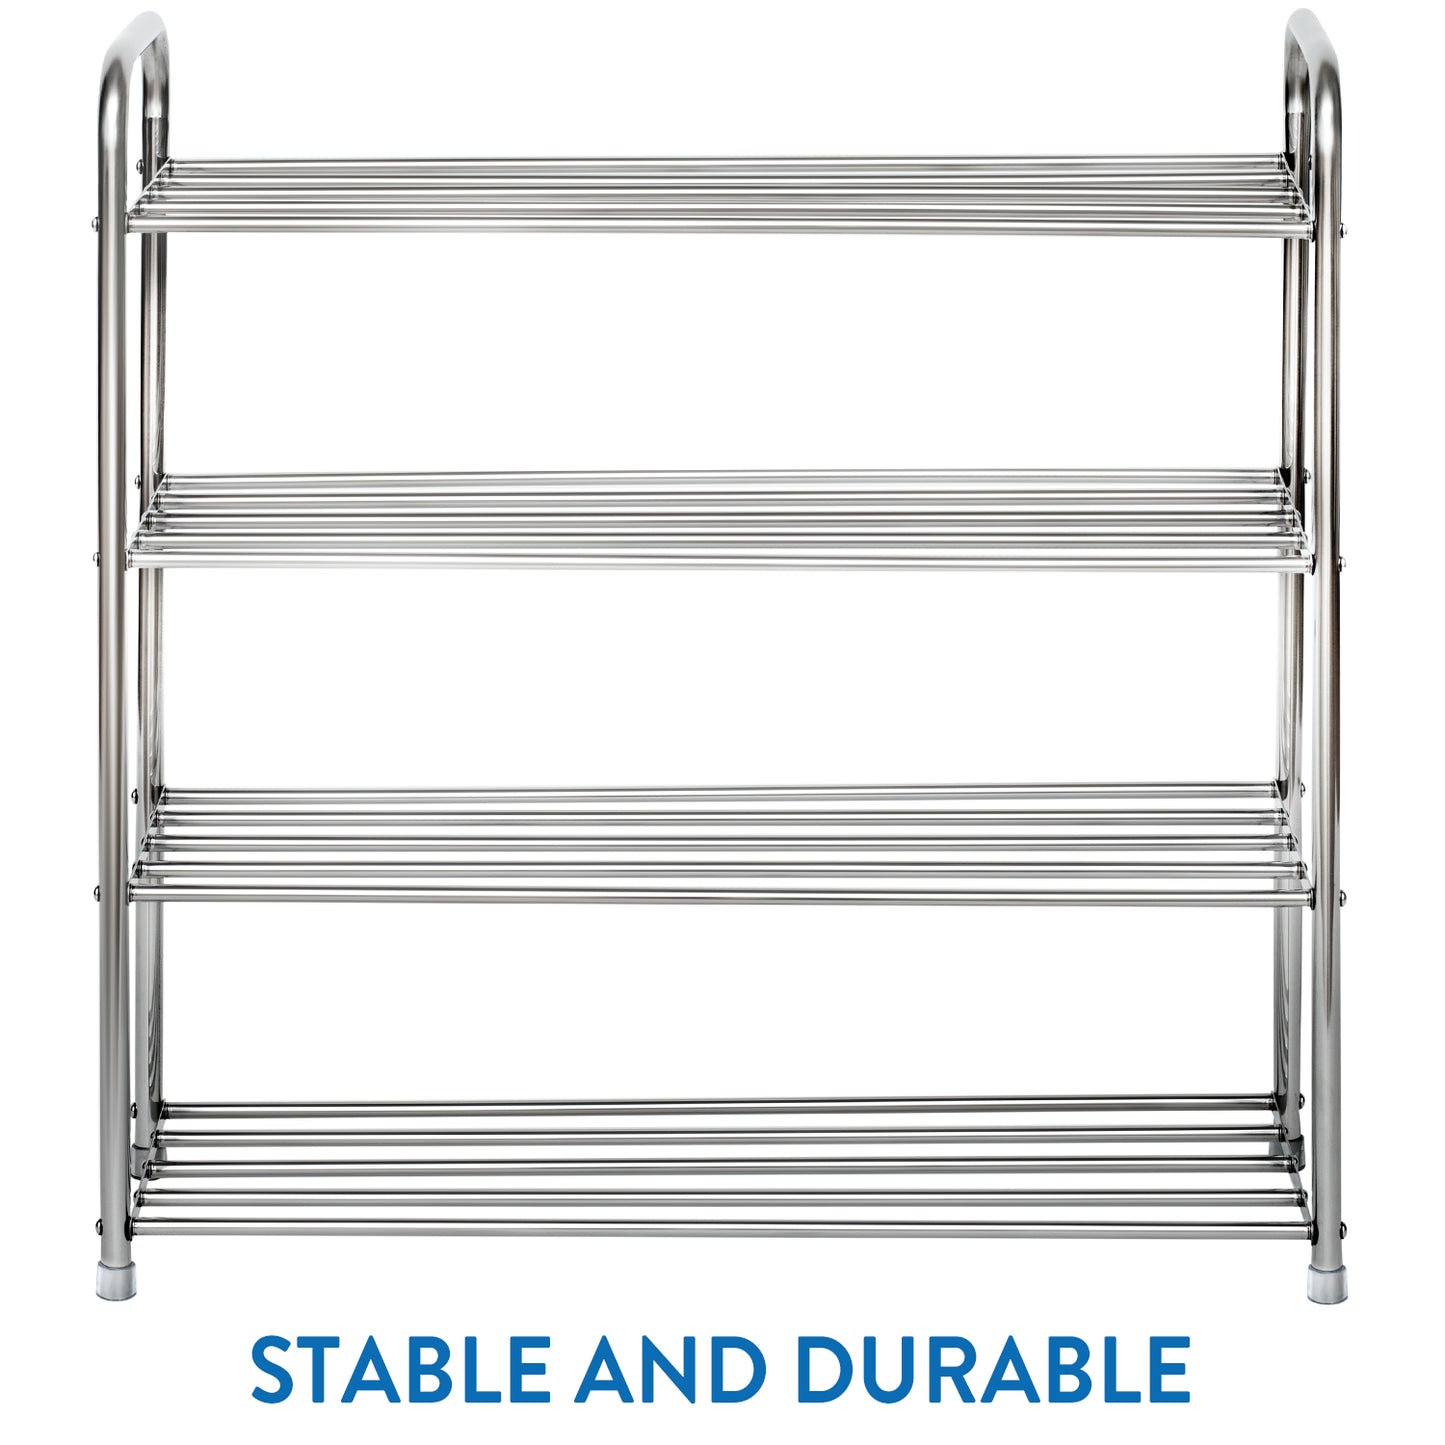  Stainless Steel 4 Tier Shoe Rack, Stable, Durable and Sturdy,